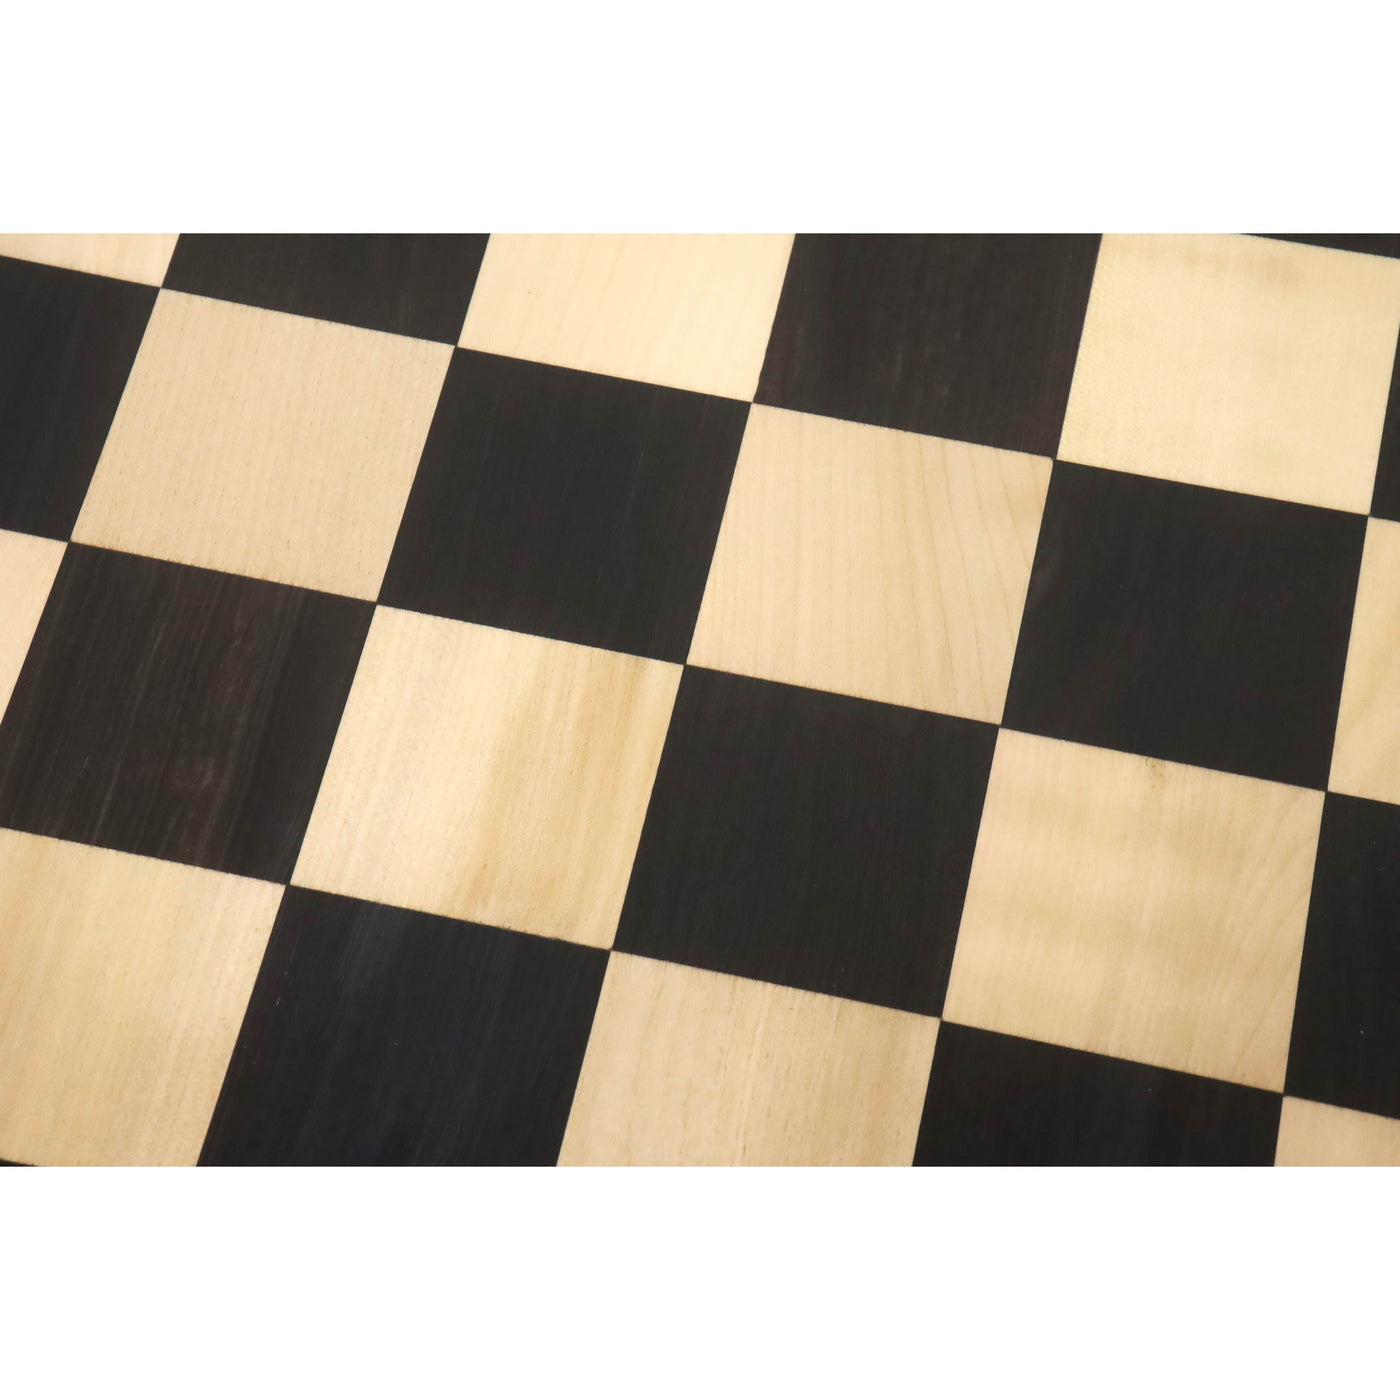 Combo of 4" Sleek Staunton Luxury Chess Set - Pieces in Ebony Wood with Board and box